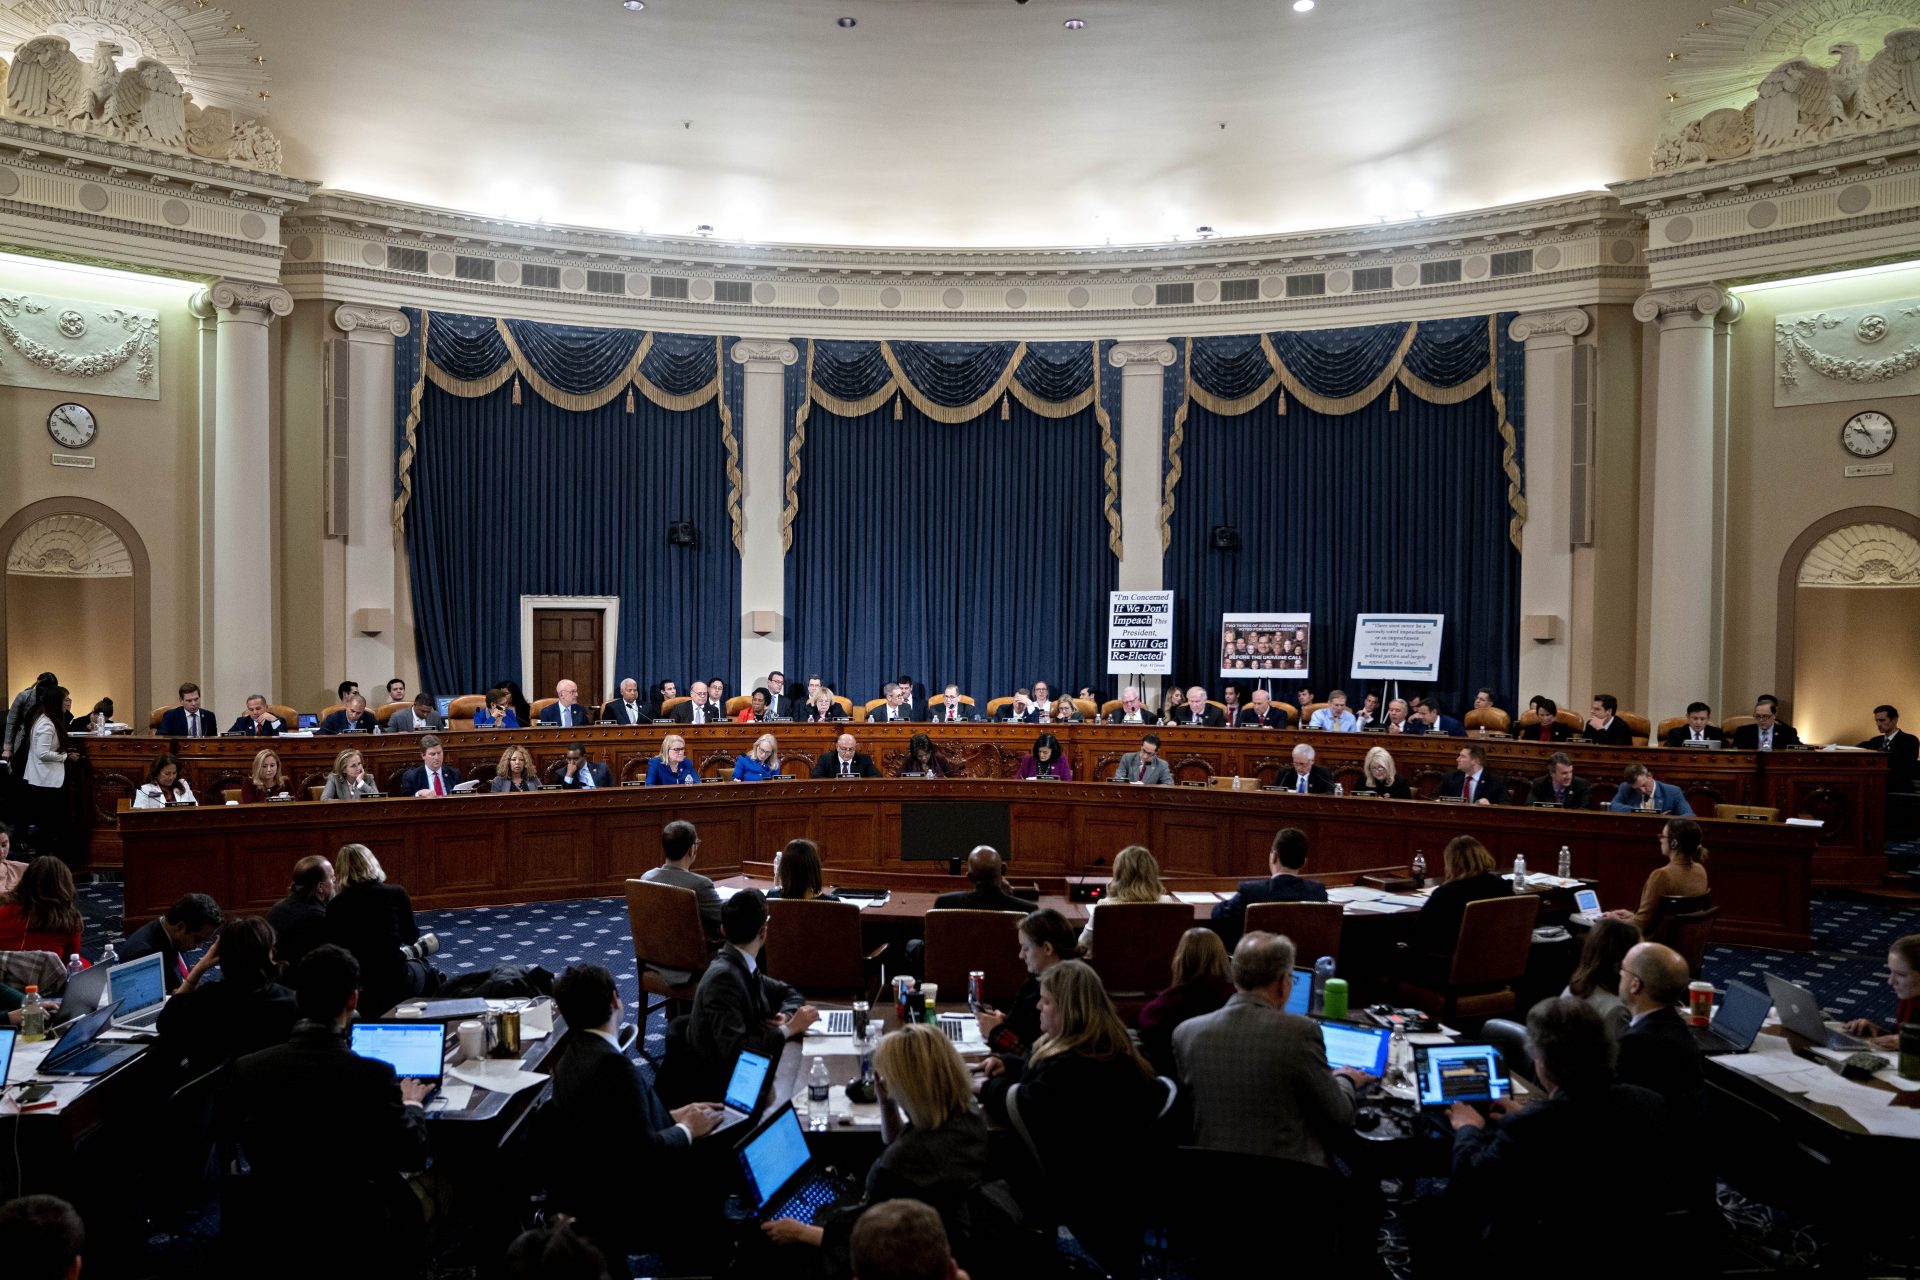 Committee members work into the late evening during a House Judiciary Committee markup of the articles of impeachment against President Donald Trump, on Capitol Hill in Washington, Thursday, Dec. 12, 2019.